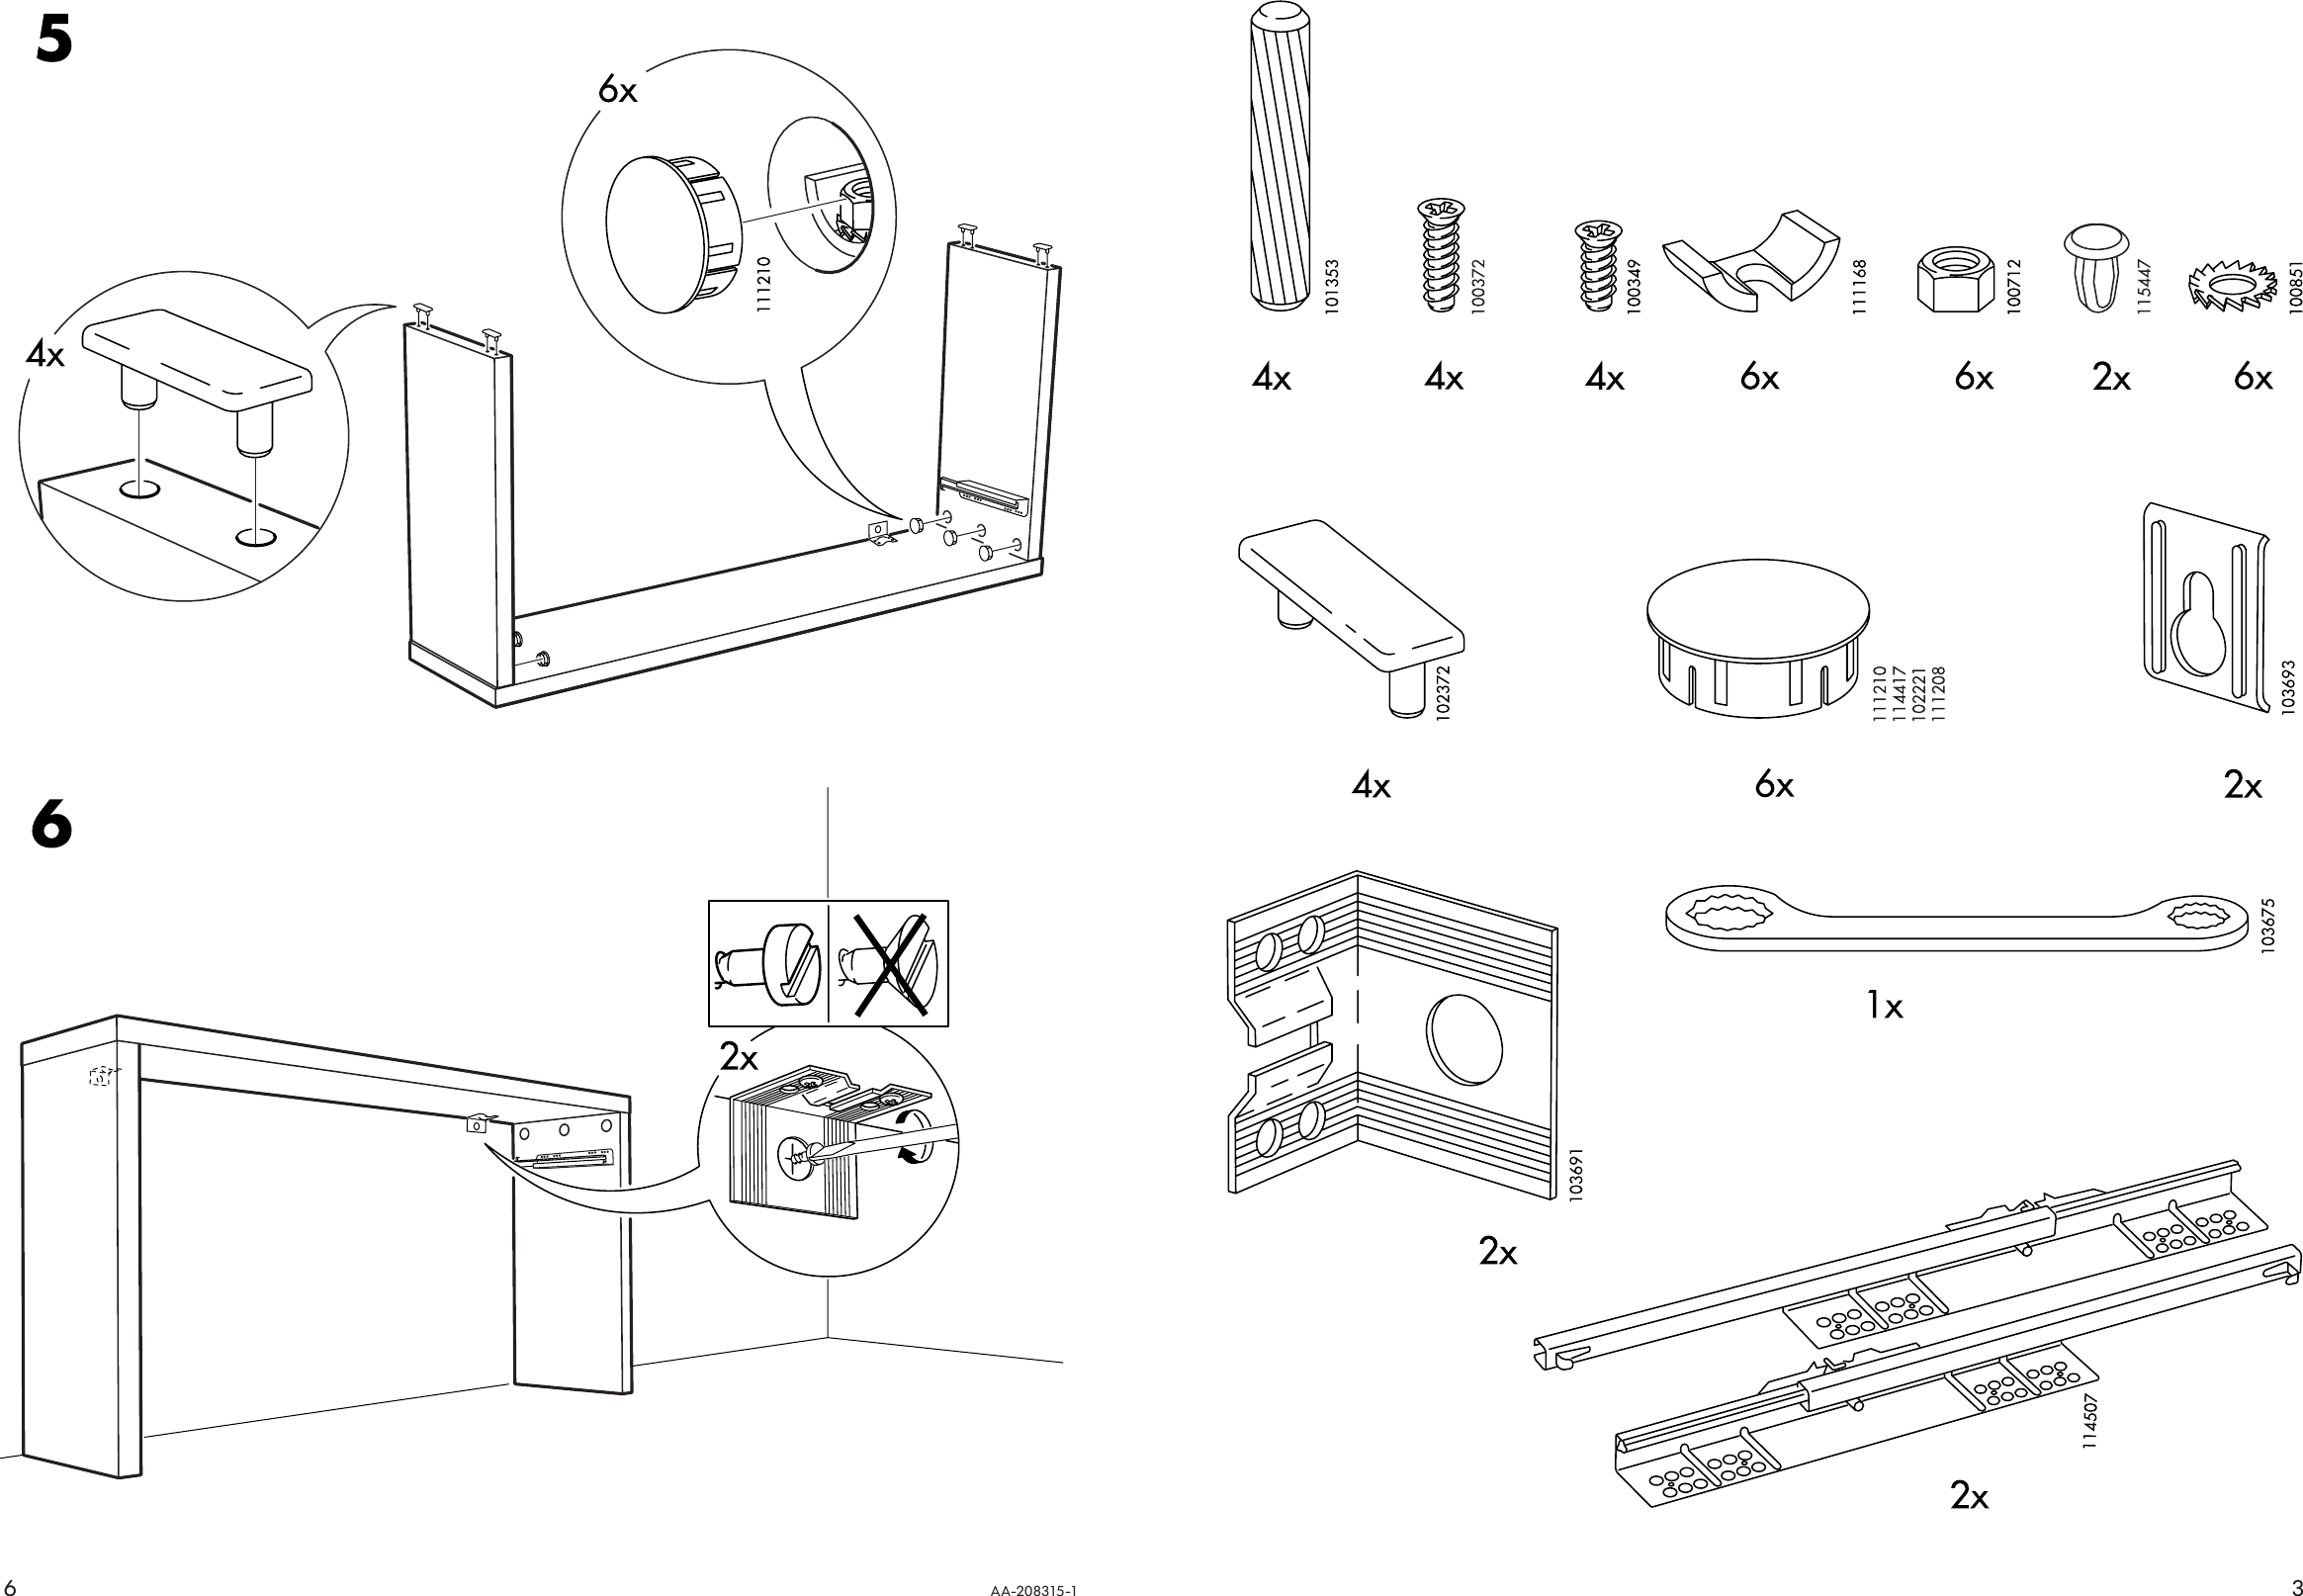 Page 3 of 4 - Ikea Ikea-Malm-Dressing-Table-75X17-Assembly-Instruction